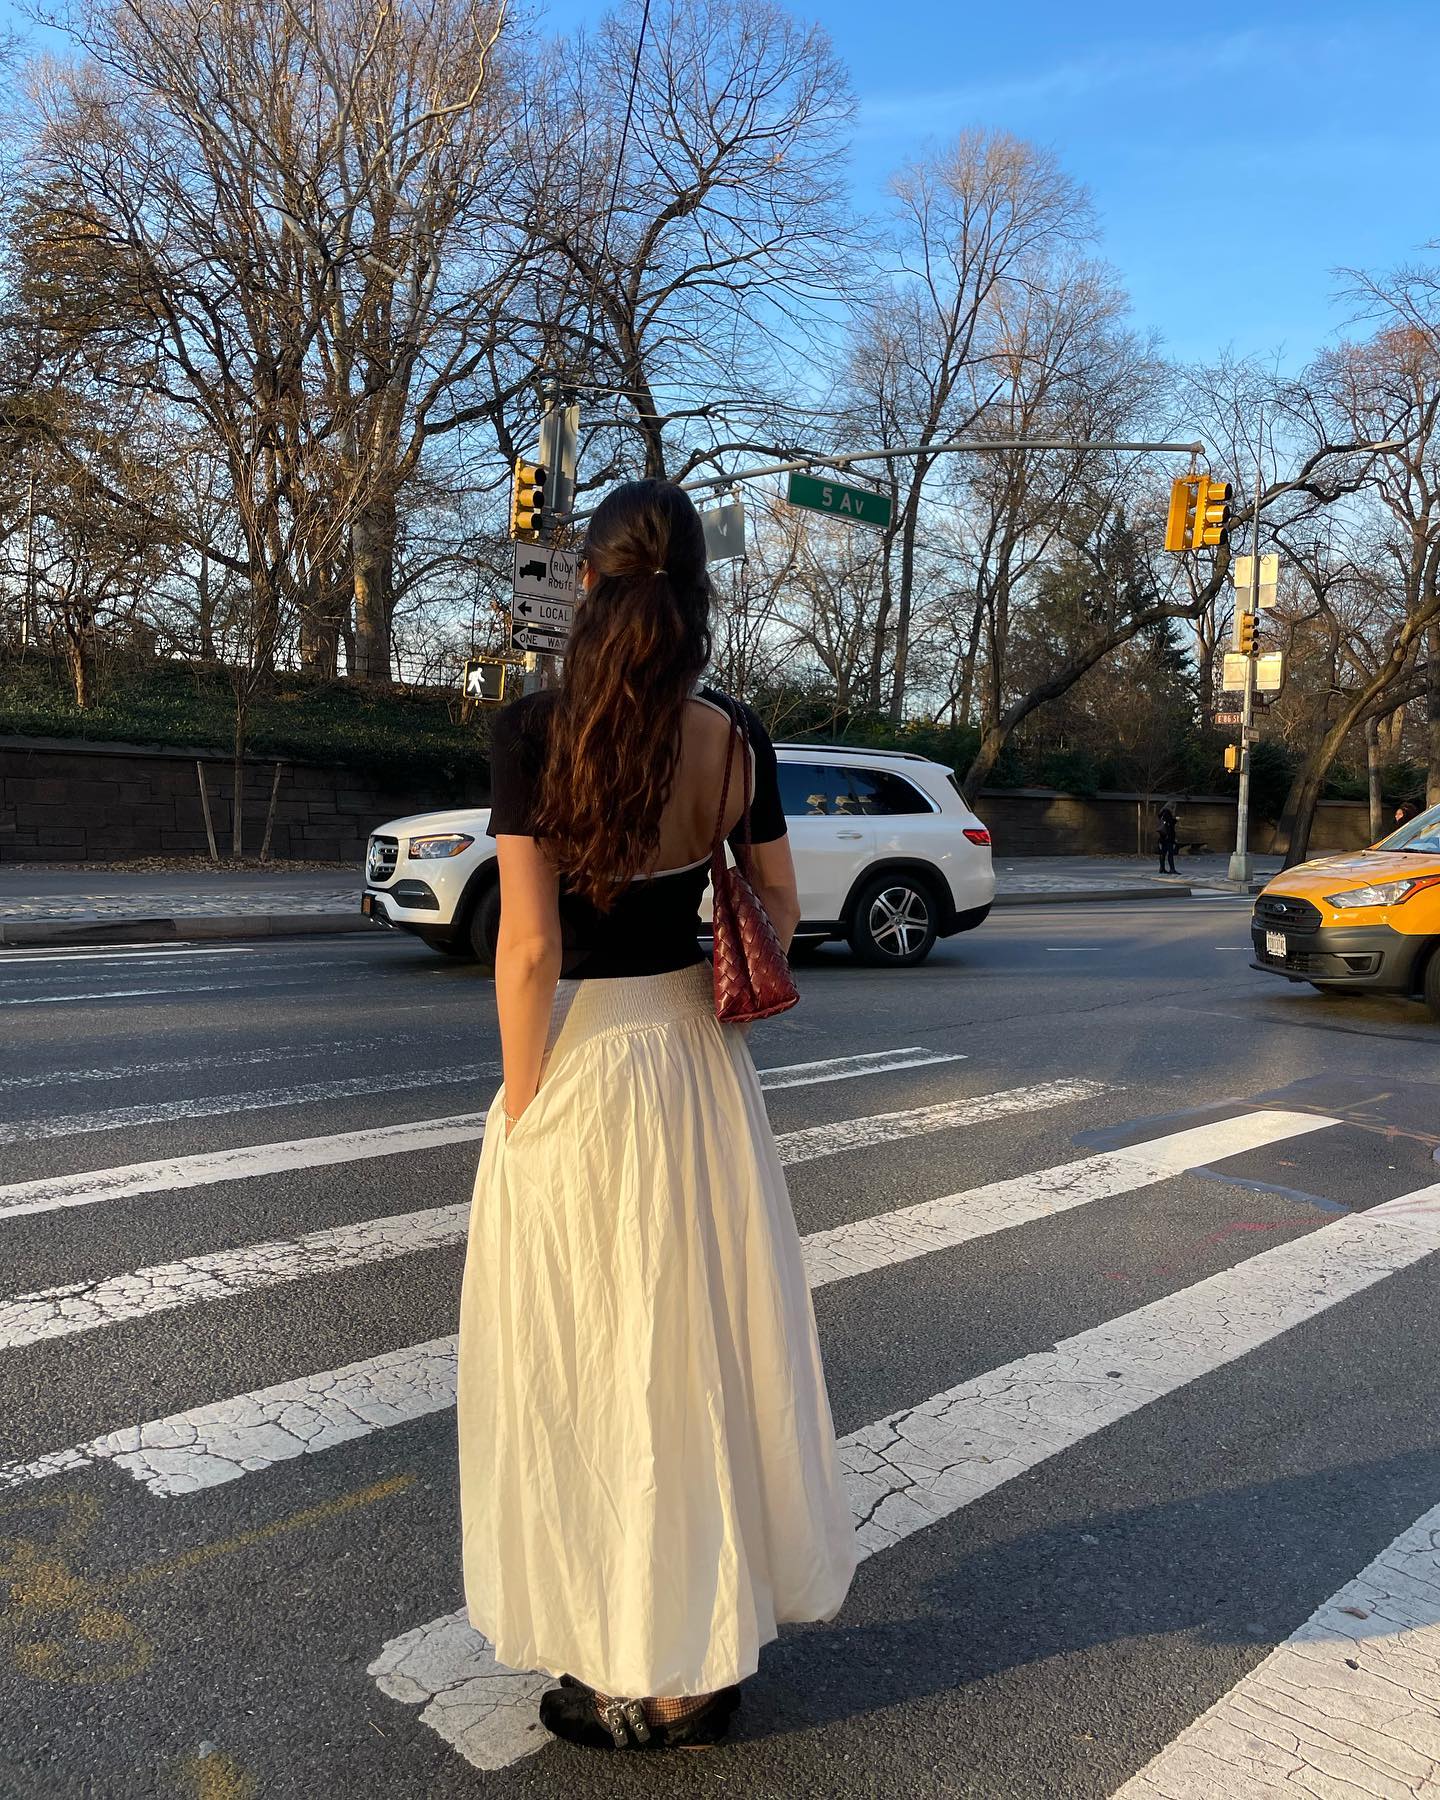 Cotton Skirt Trend: @anna_laplaca wears a cream cotton skirt with a black top whilst at a street crossing